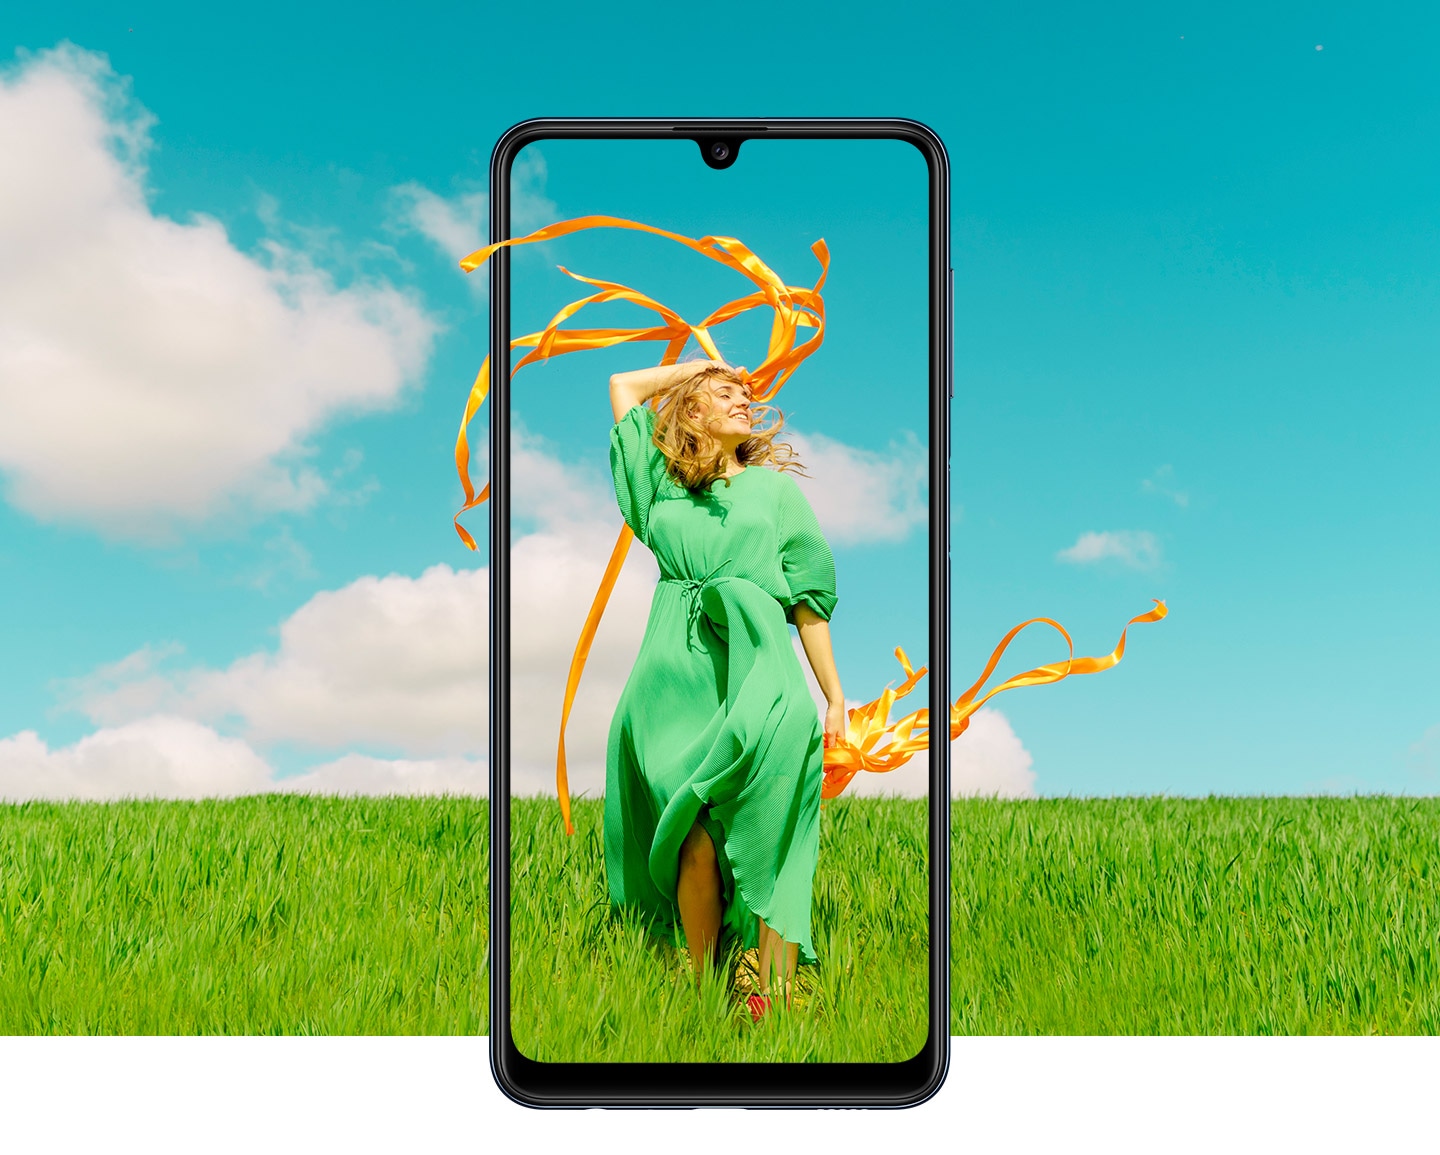 A Galaxy M32 is seen from the front. Onscreen, a woman in a green dress is dancing as ribbons in her hands flow in the breeze. The ribbons and green field background go beyond the bezel.